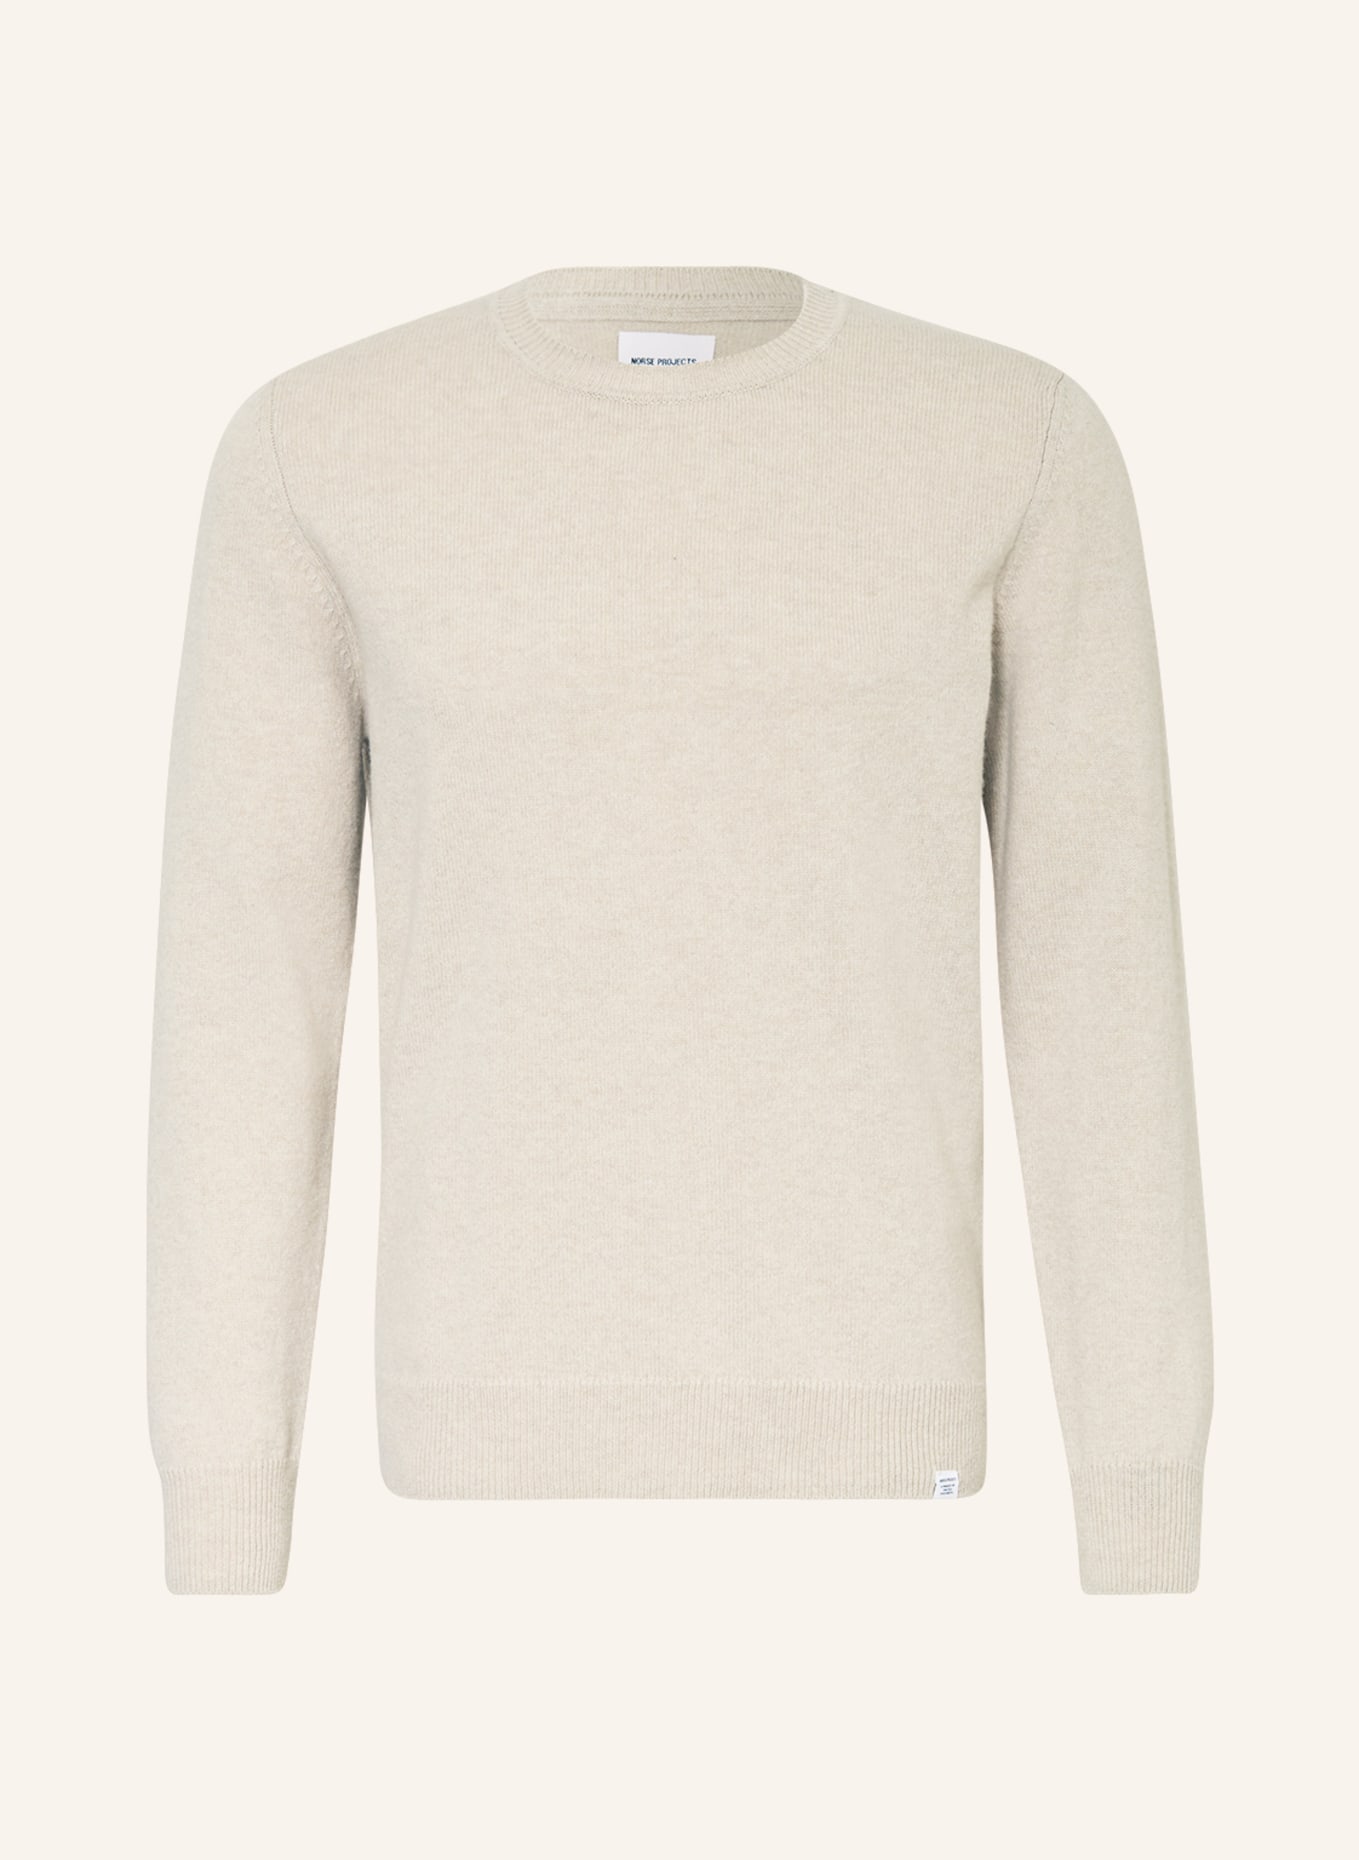 NORSE PROJECTS Pullover SIGFRED, Farbe: CREME (Bild 1)